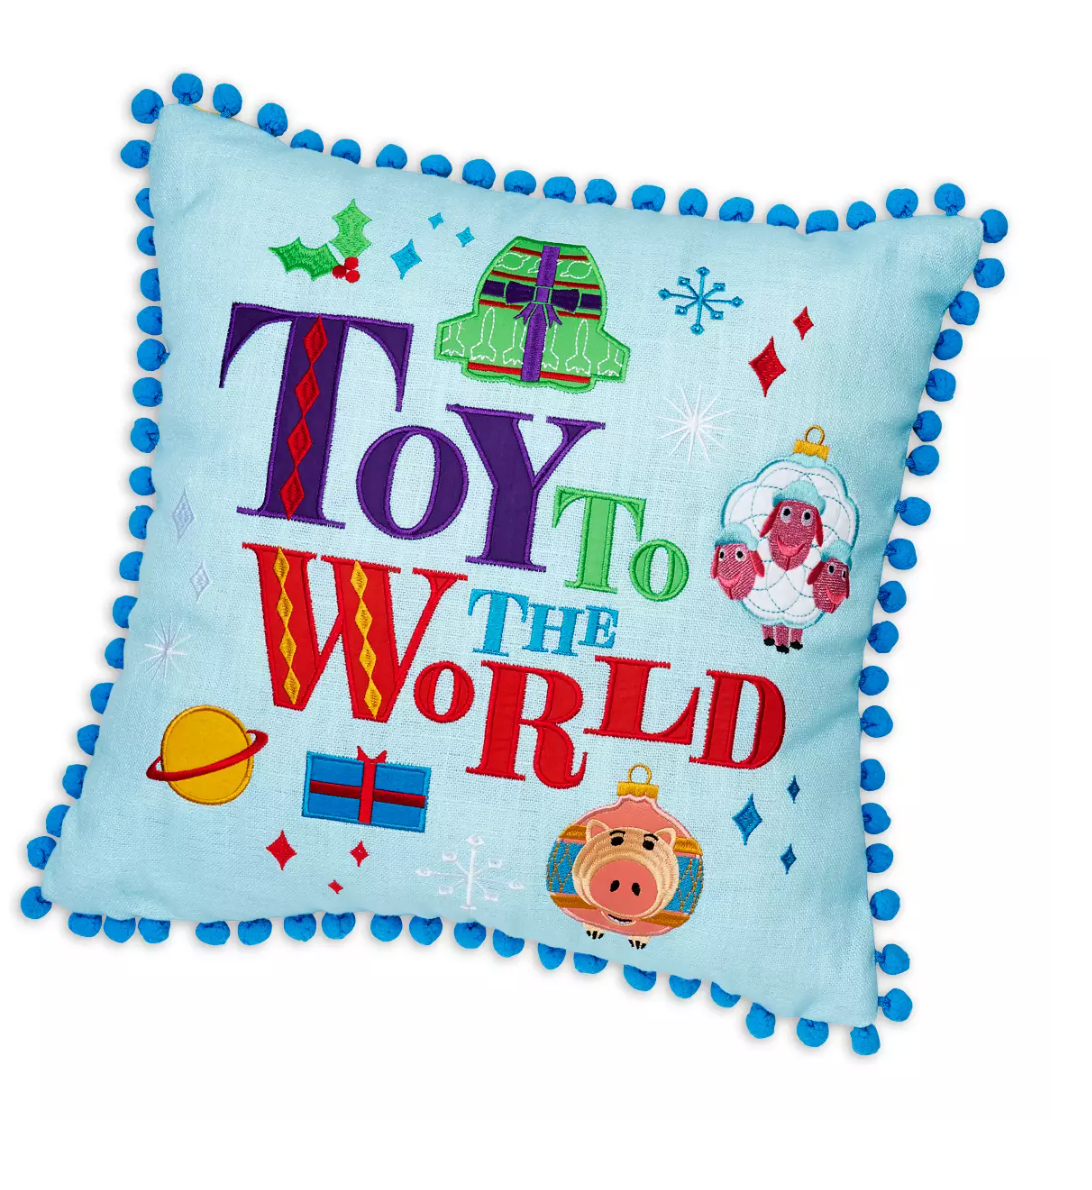 Disney Pixar's Monsters, Inc Christmas Holiday Toy to the World Pillow New Tag